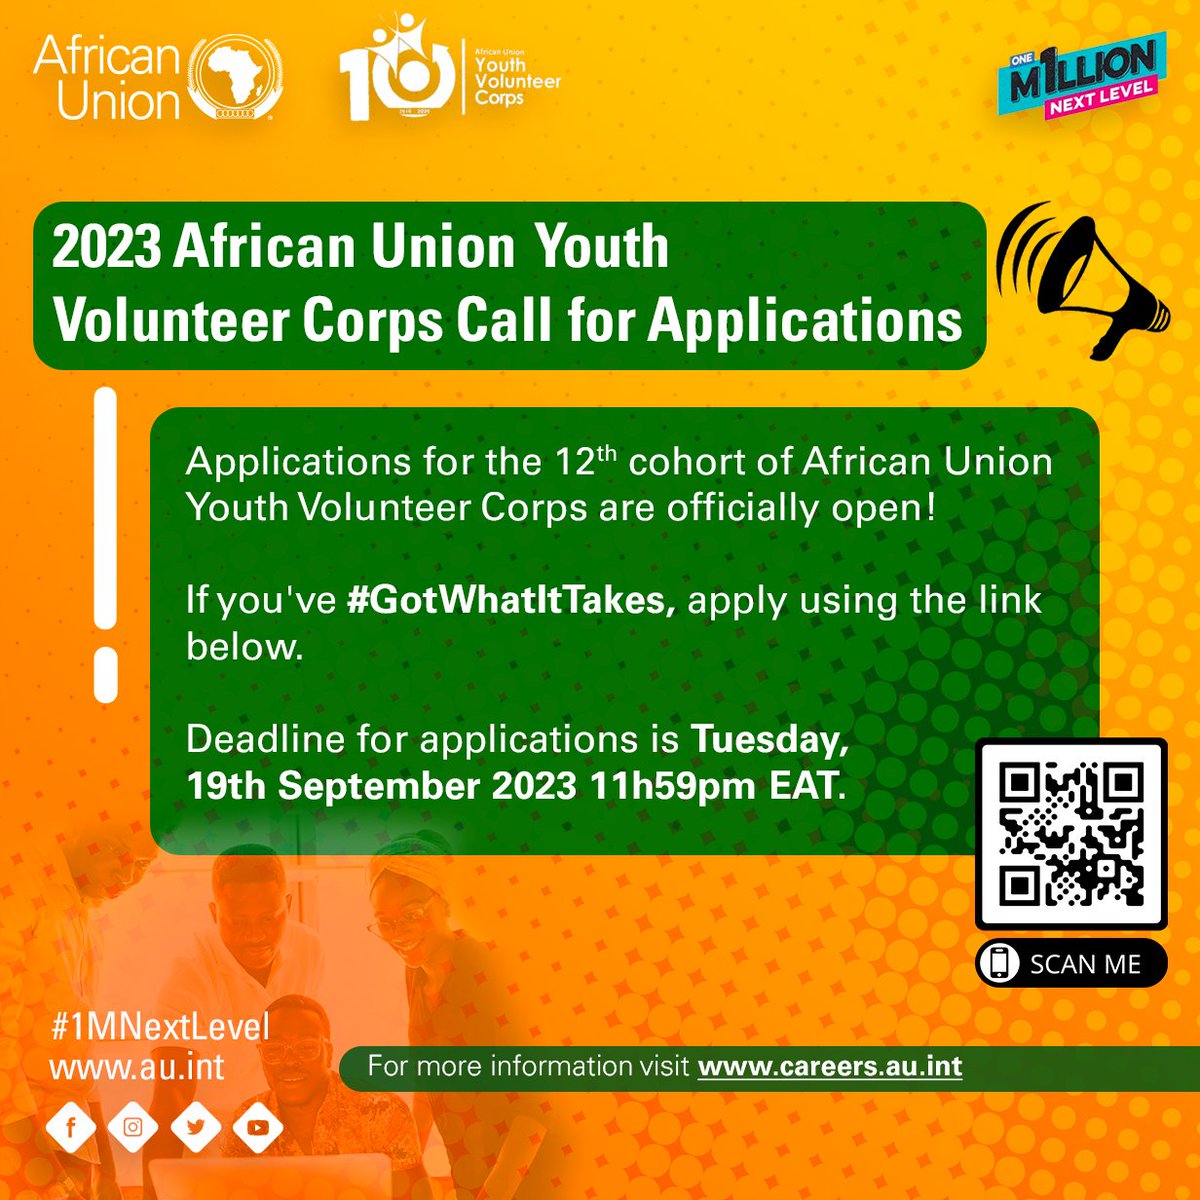 An exciting opportunity for young Africans! Apply to join our leadership program and contribute to the continent's development. Don't wait until the deadline - scan the QR code or send in your application via this link today: t.ly/RytDx! #1mNextLevel #GotWhatItTake